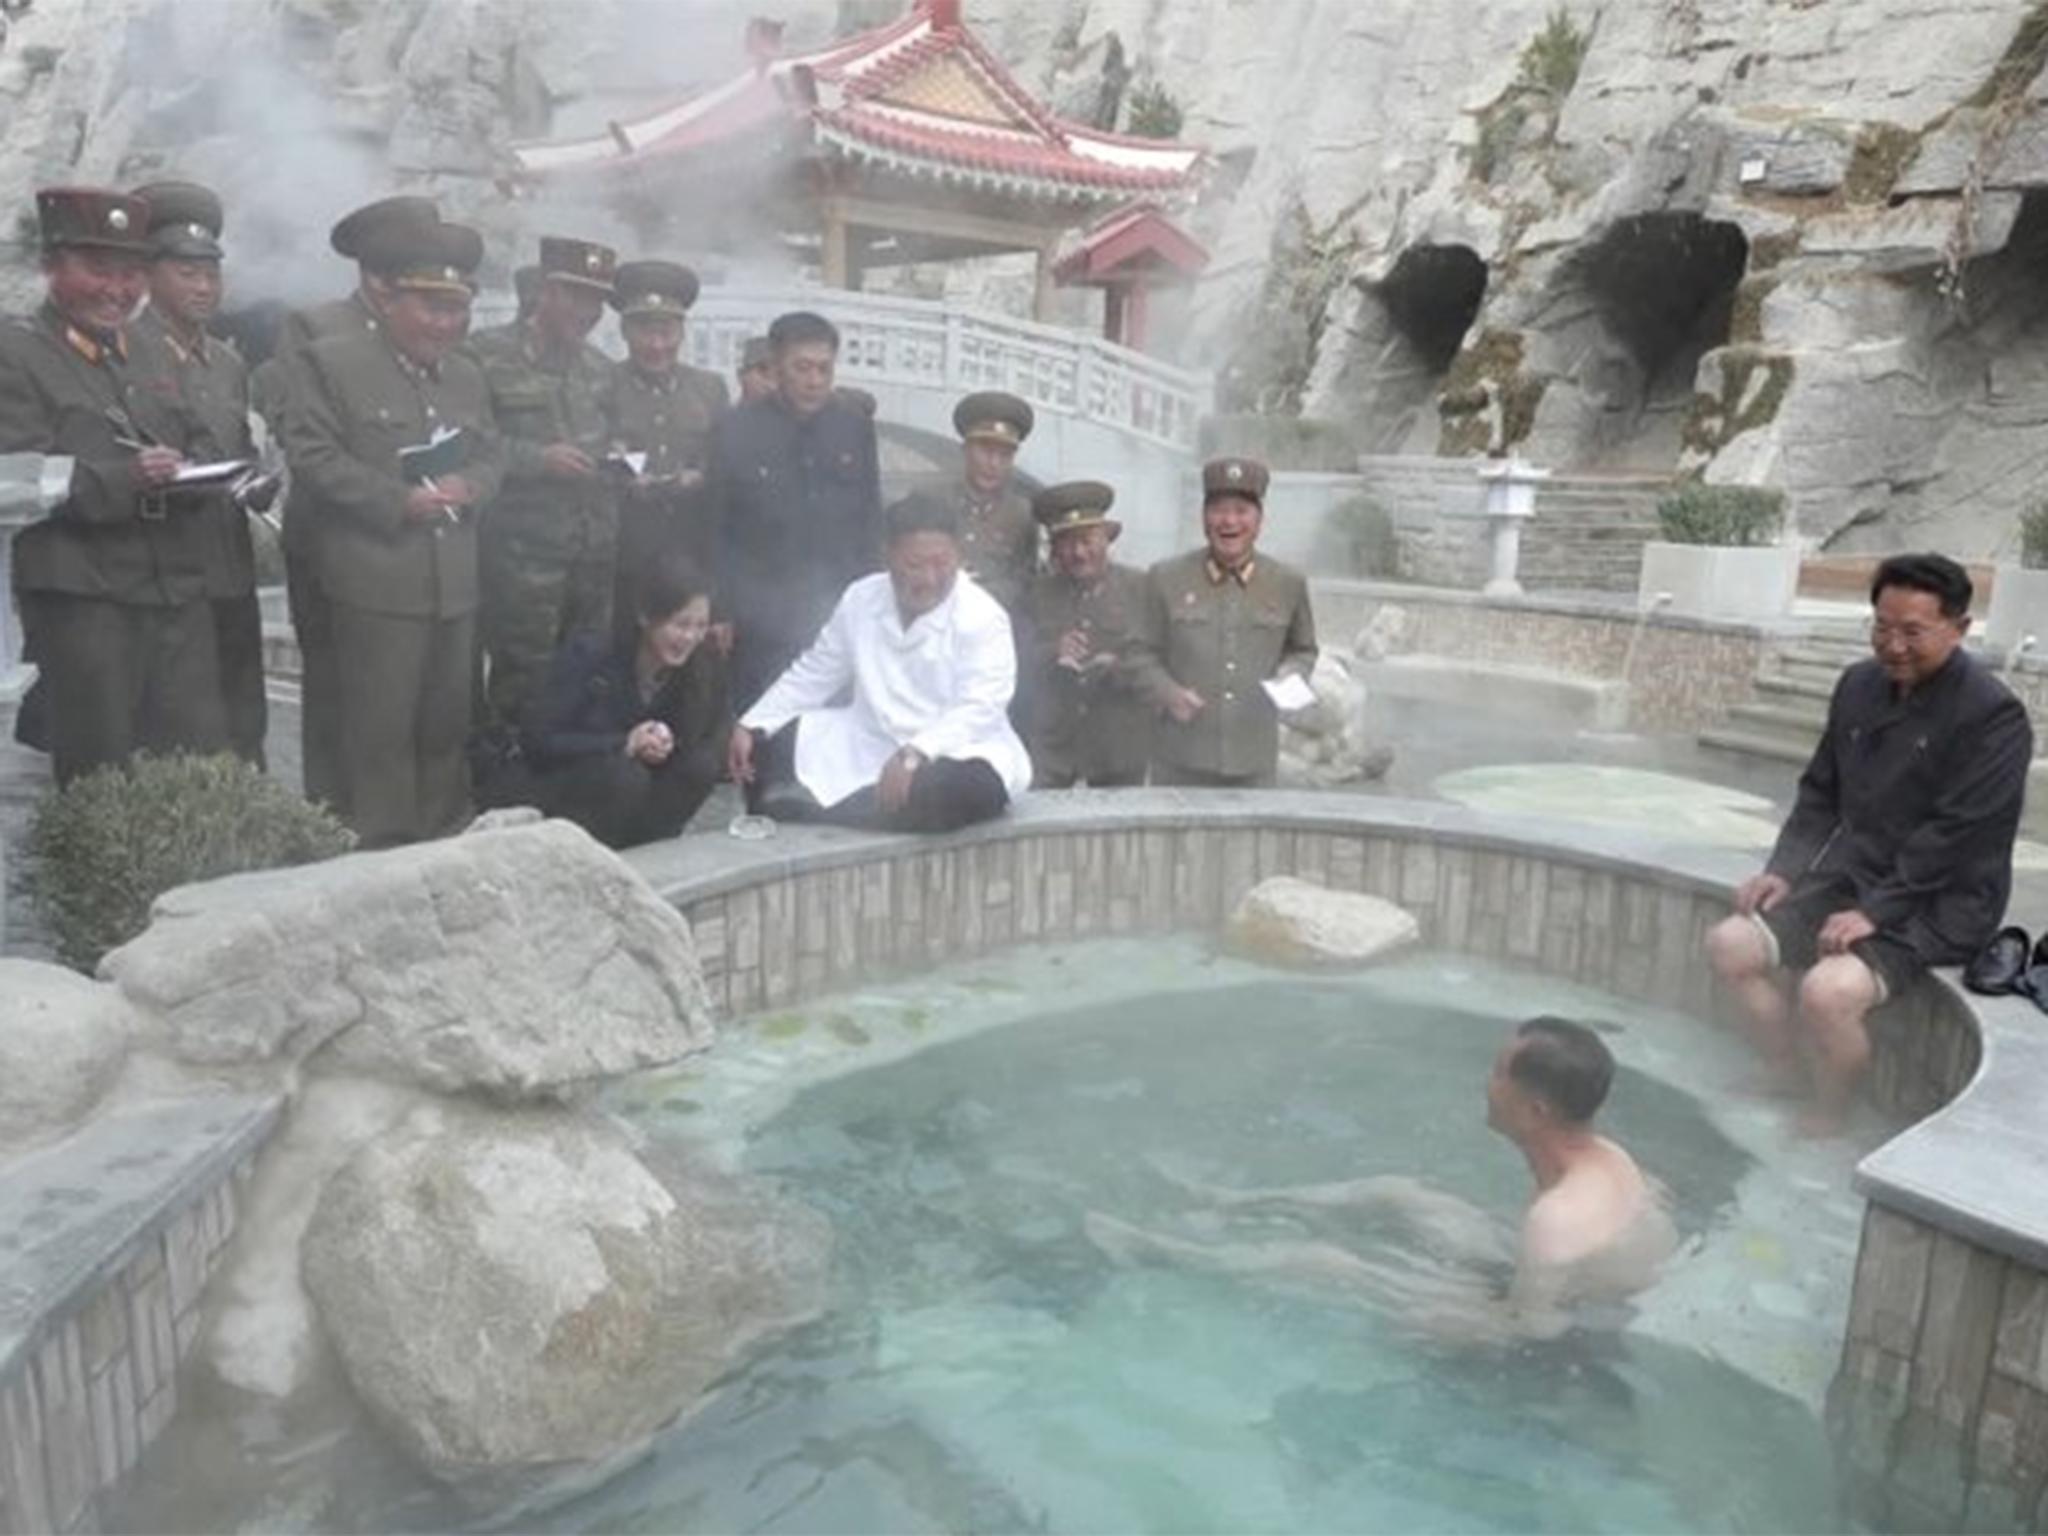 Tourists will be treated in hot springs such as Yangdok, where Kim Jong-un recently